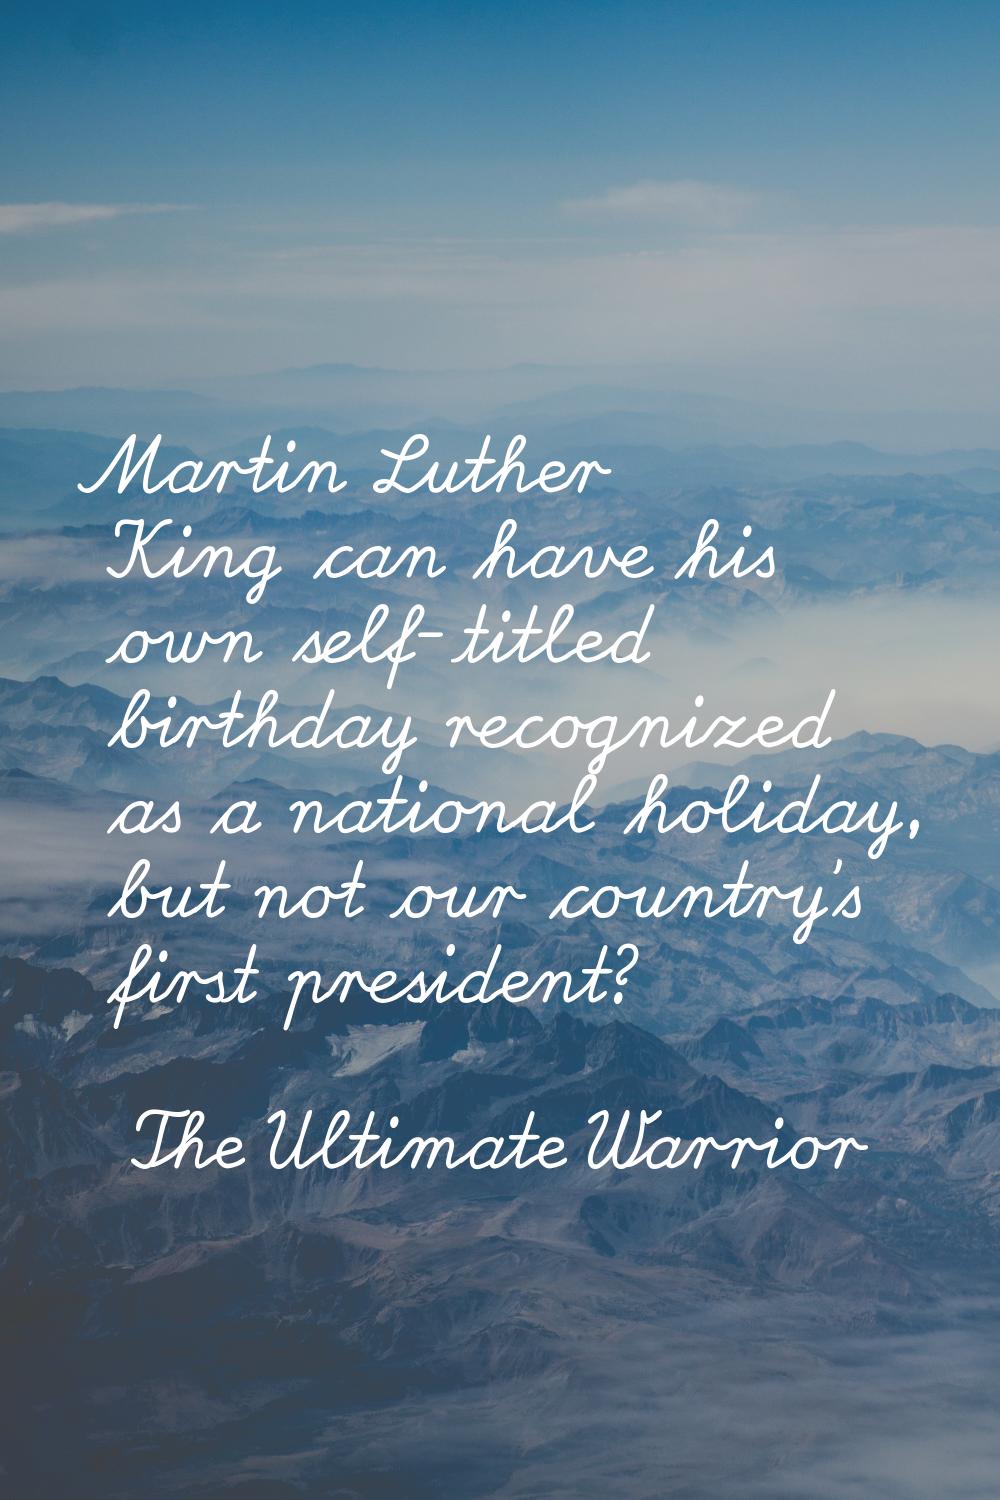 Martin Luther King can have his own self-titled birthday recognized as a national holiday, but not 